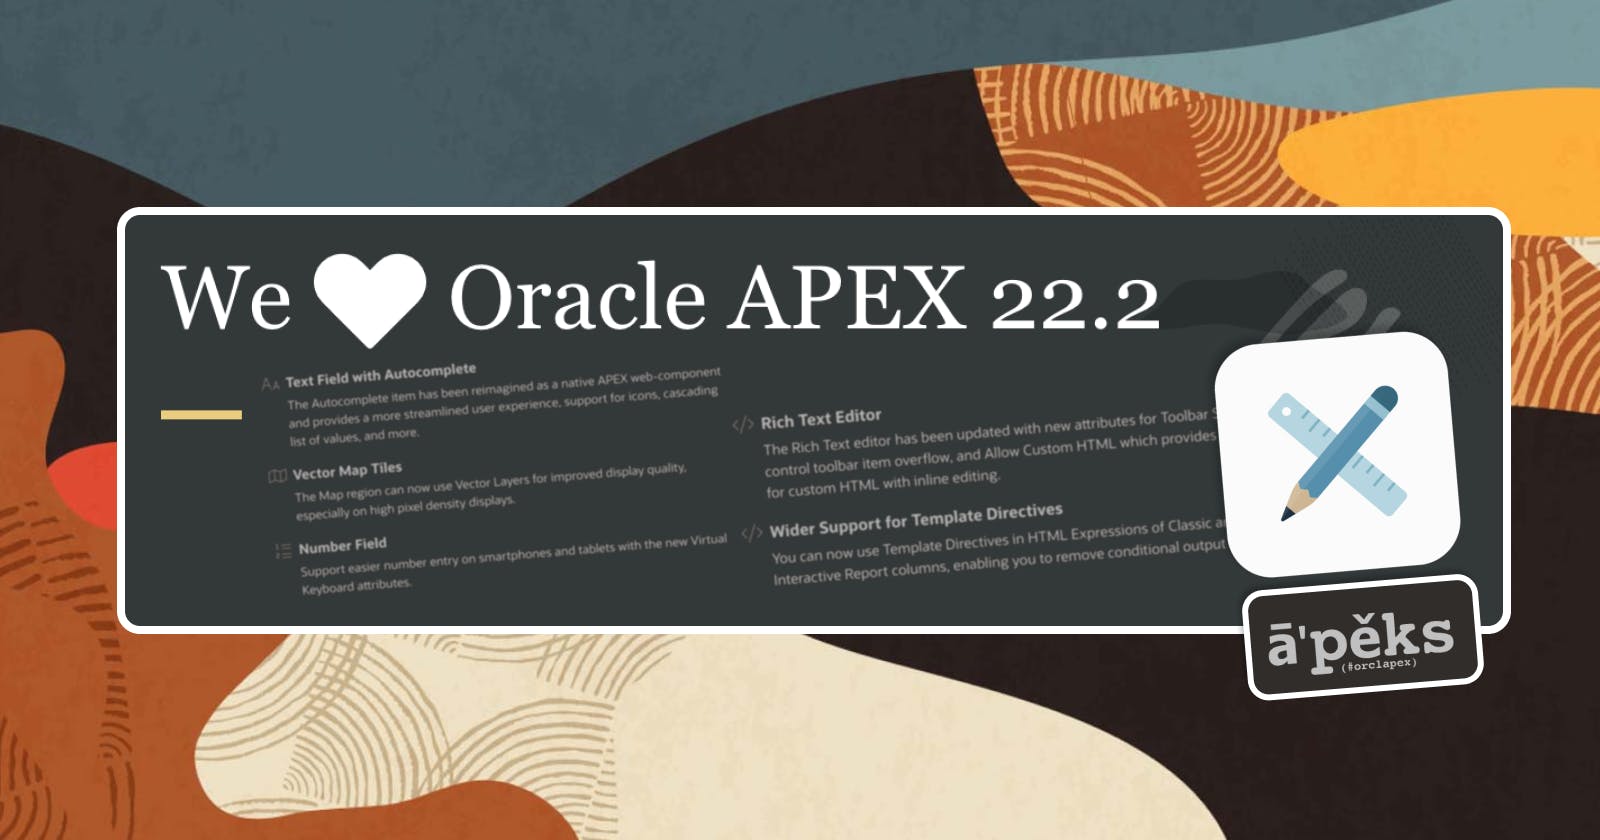 A quick look at APEX 22.2 - Dynamic Actions, Number field, Template Directives, Session State